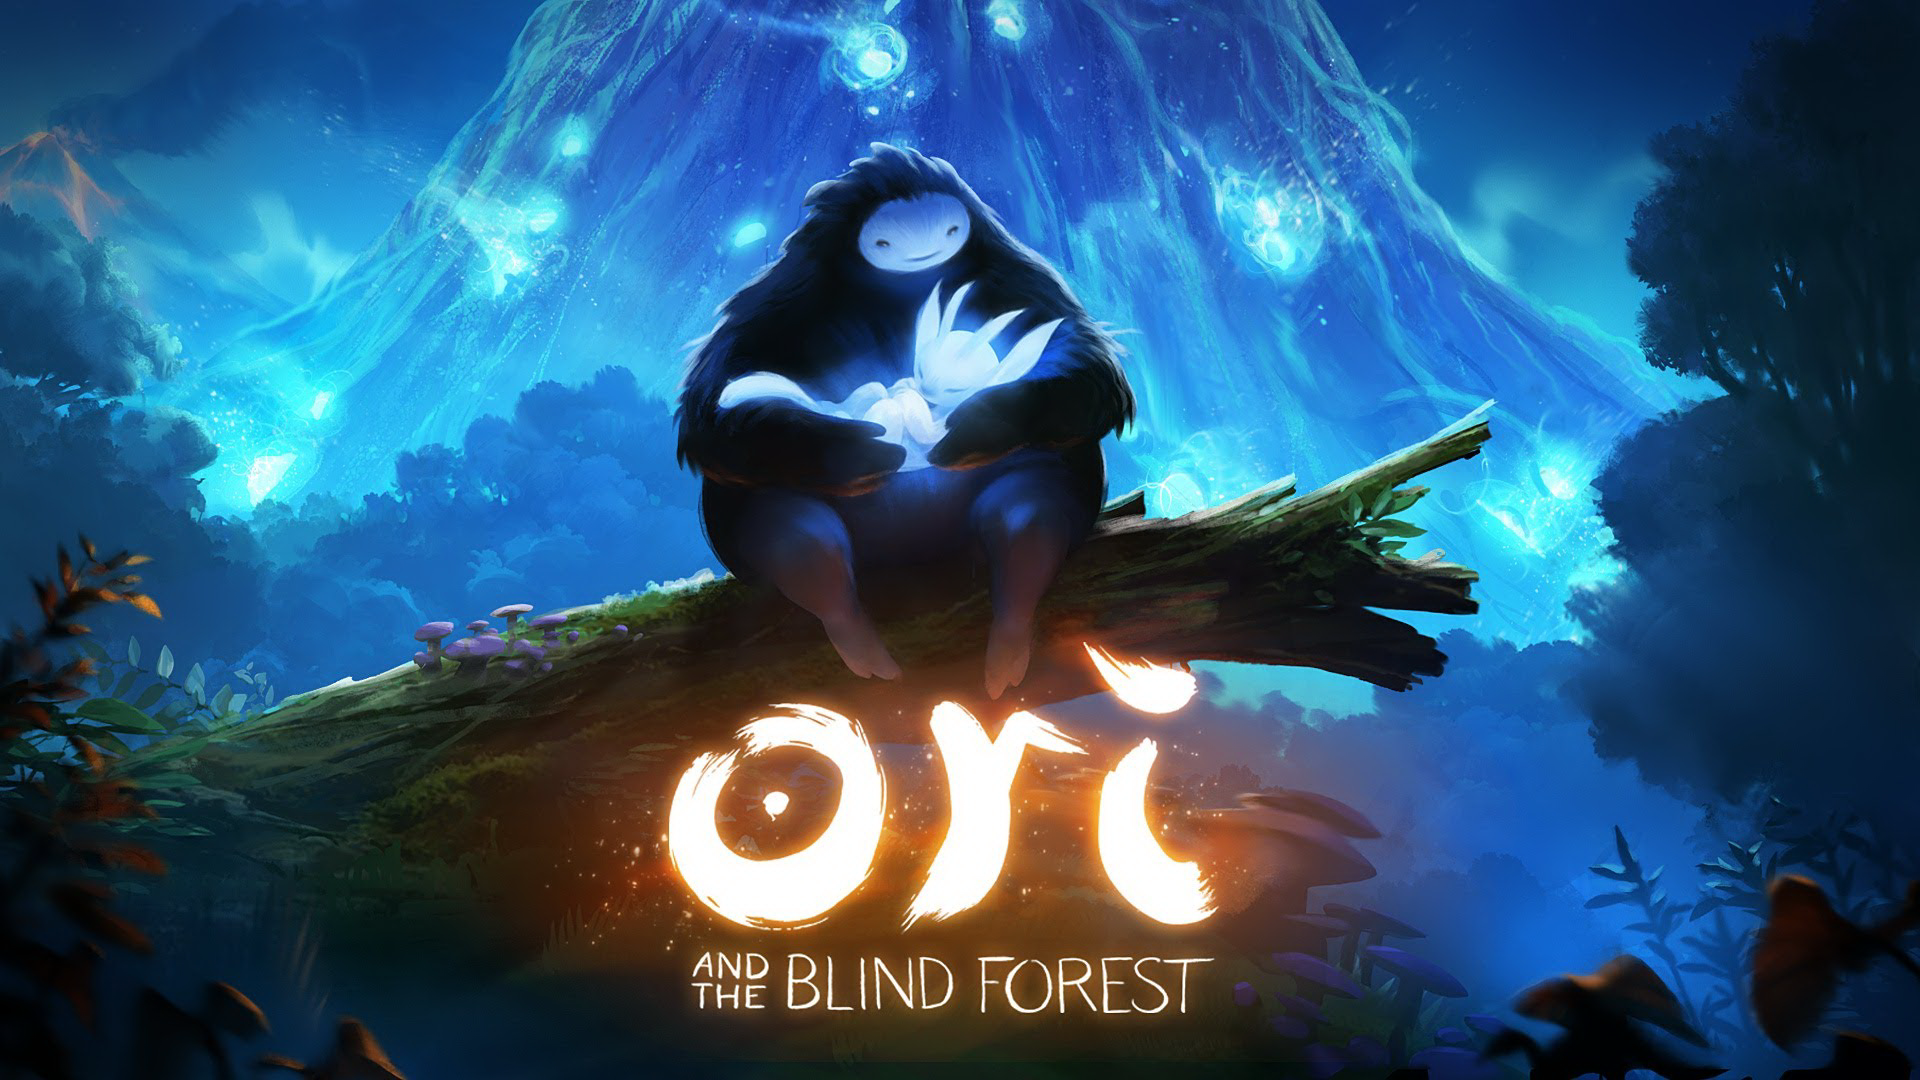 Ori And The Blind Forest Forest Fairy Tale Cyan Video Games Artwork 1920x1080